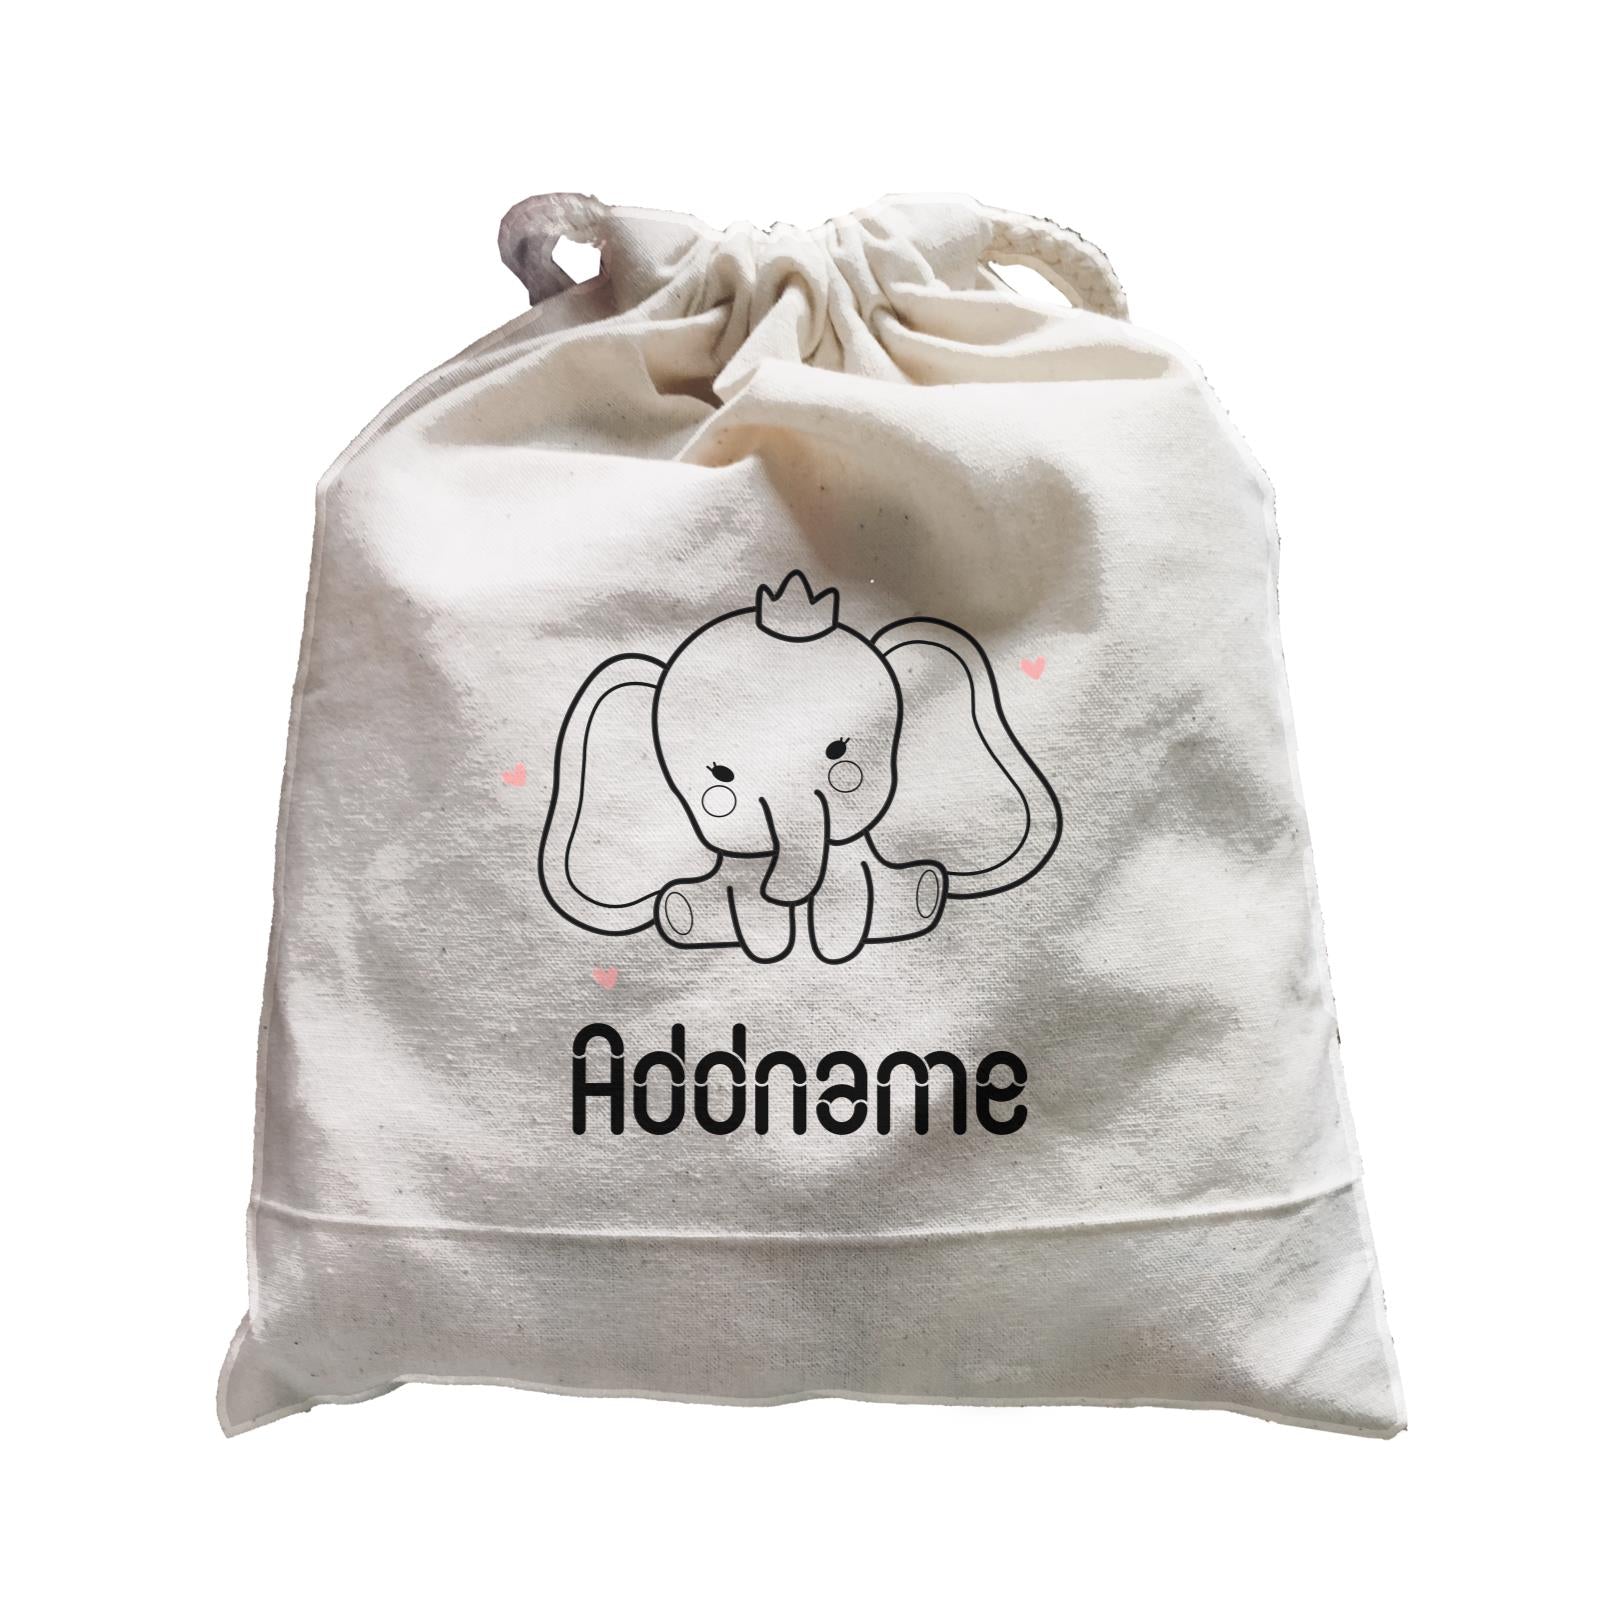 Coloring Outline Cute Hand Drawn Animals Elephants Baby Elephants With Crown Addname Satchel